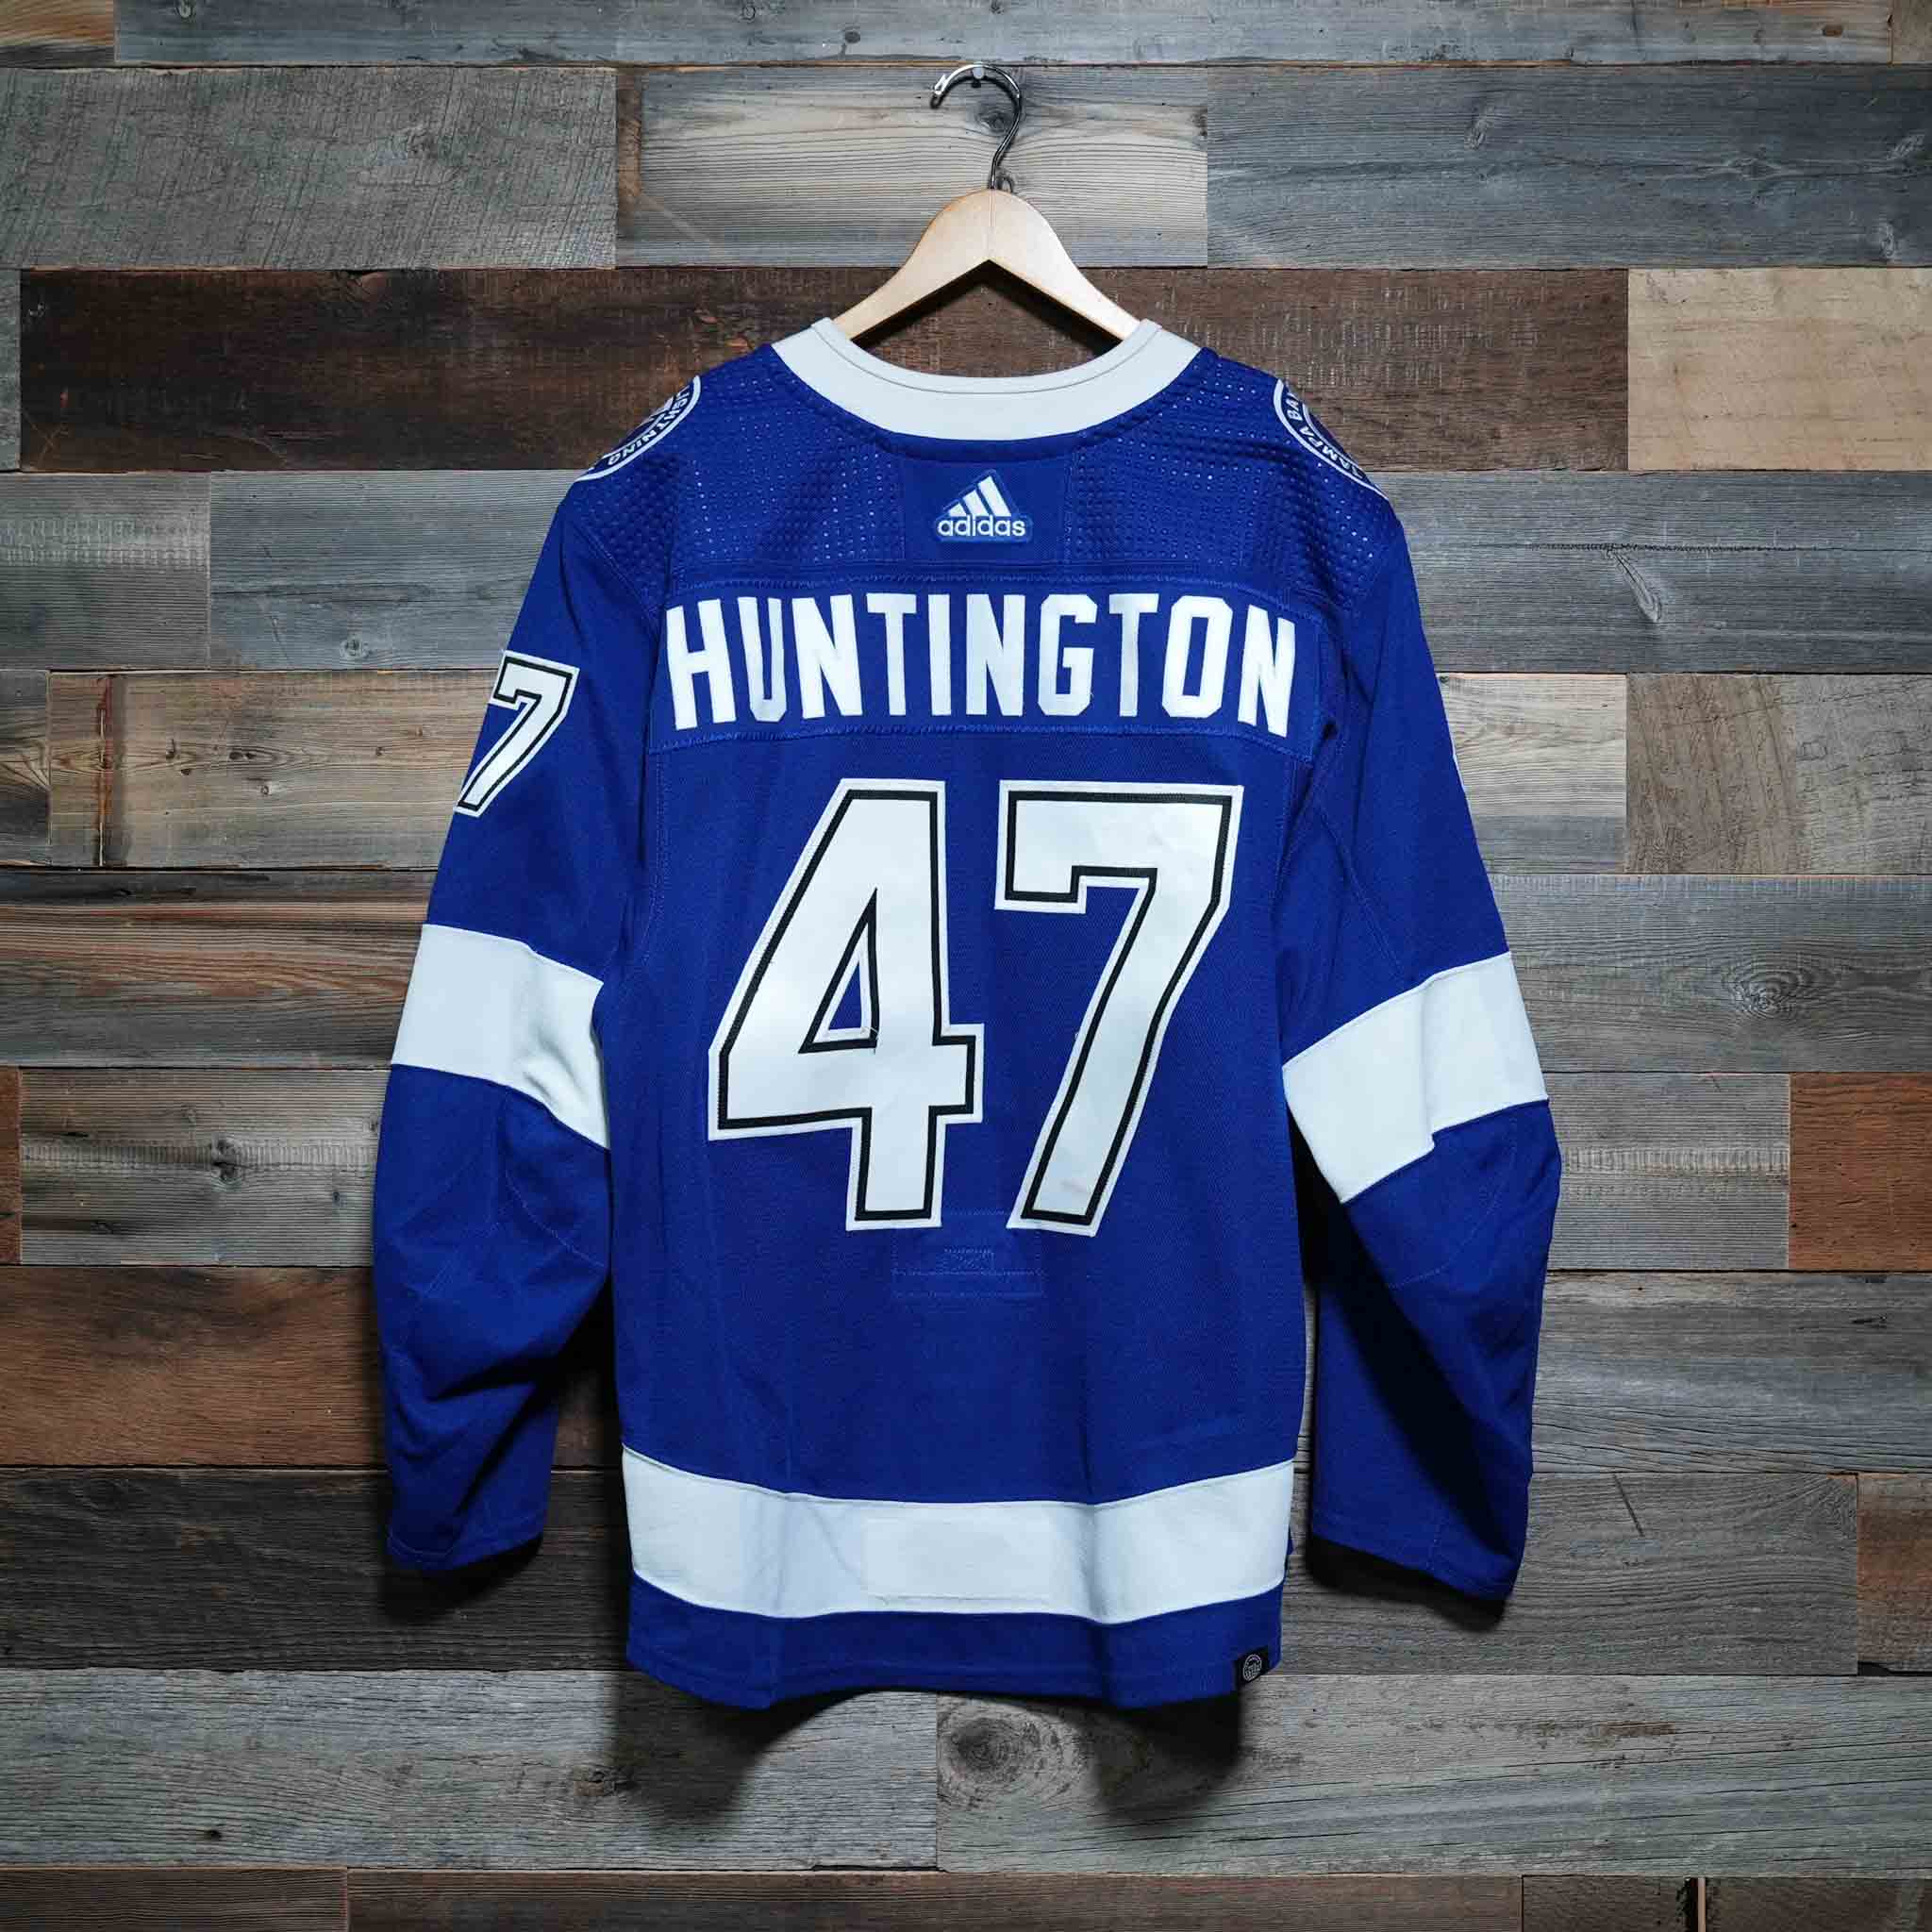 Adidas #47 Huntington Game-Issued 2020-21 Lightning Away Jersey (Size 56)